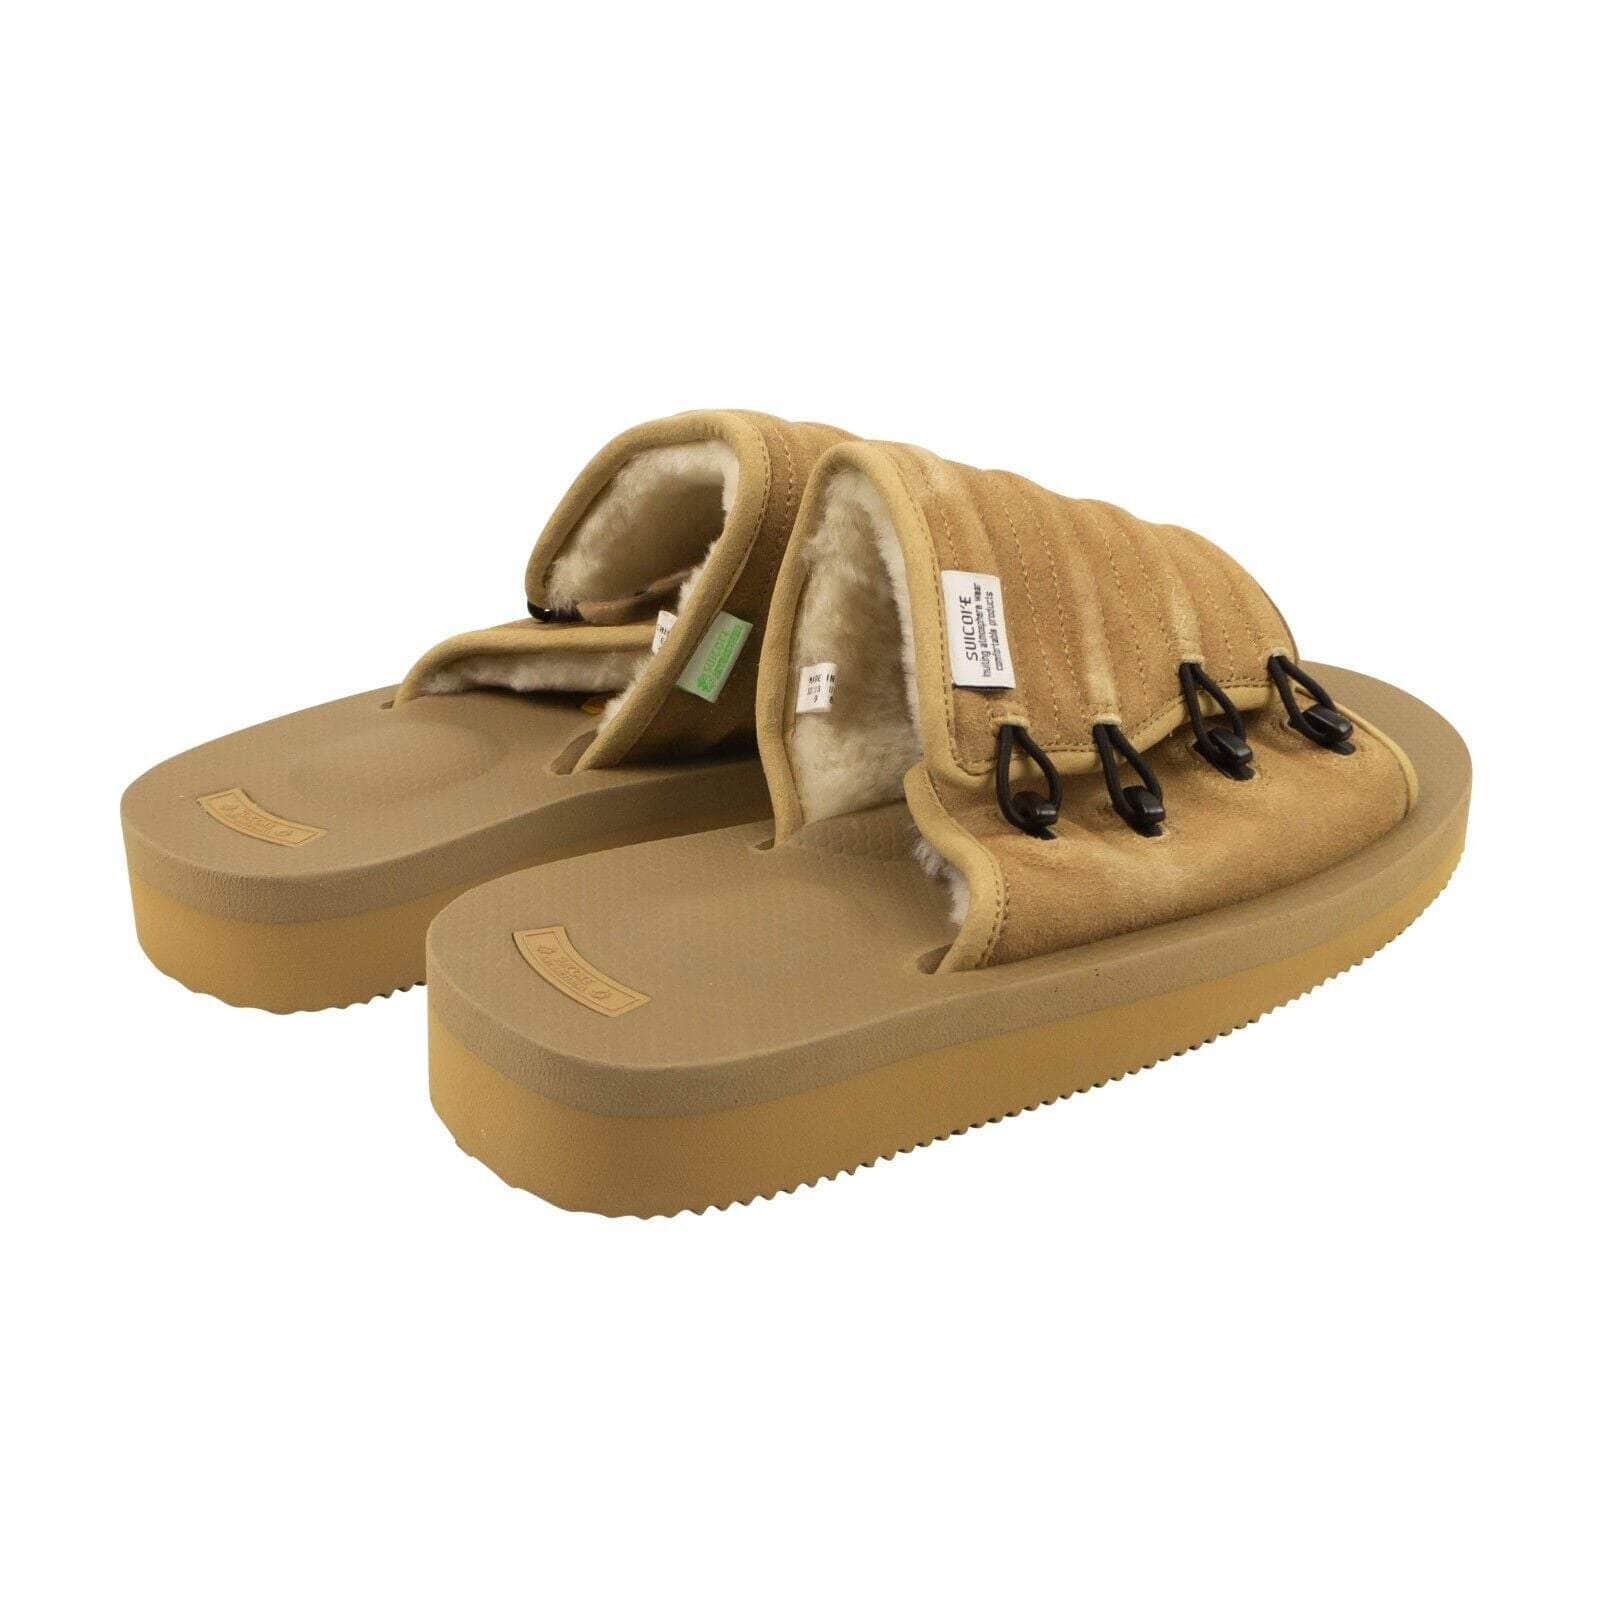 Suicoke channelenable-all, chicmi, couponcollection, gender-mens, main-shoes, mens-shoes, mens-slides-slippers, size-6, size-9, suicoke, under-250 Beige Mura Leather VM AB Fur Slides